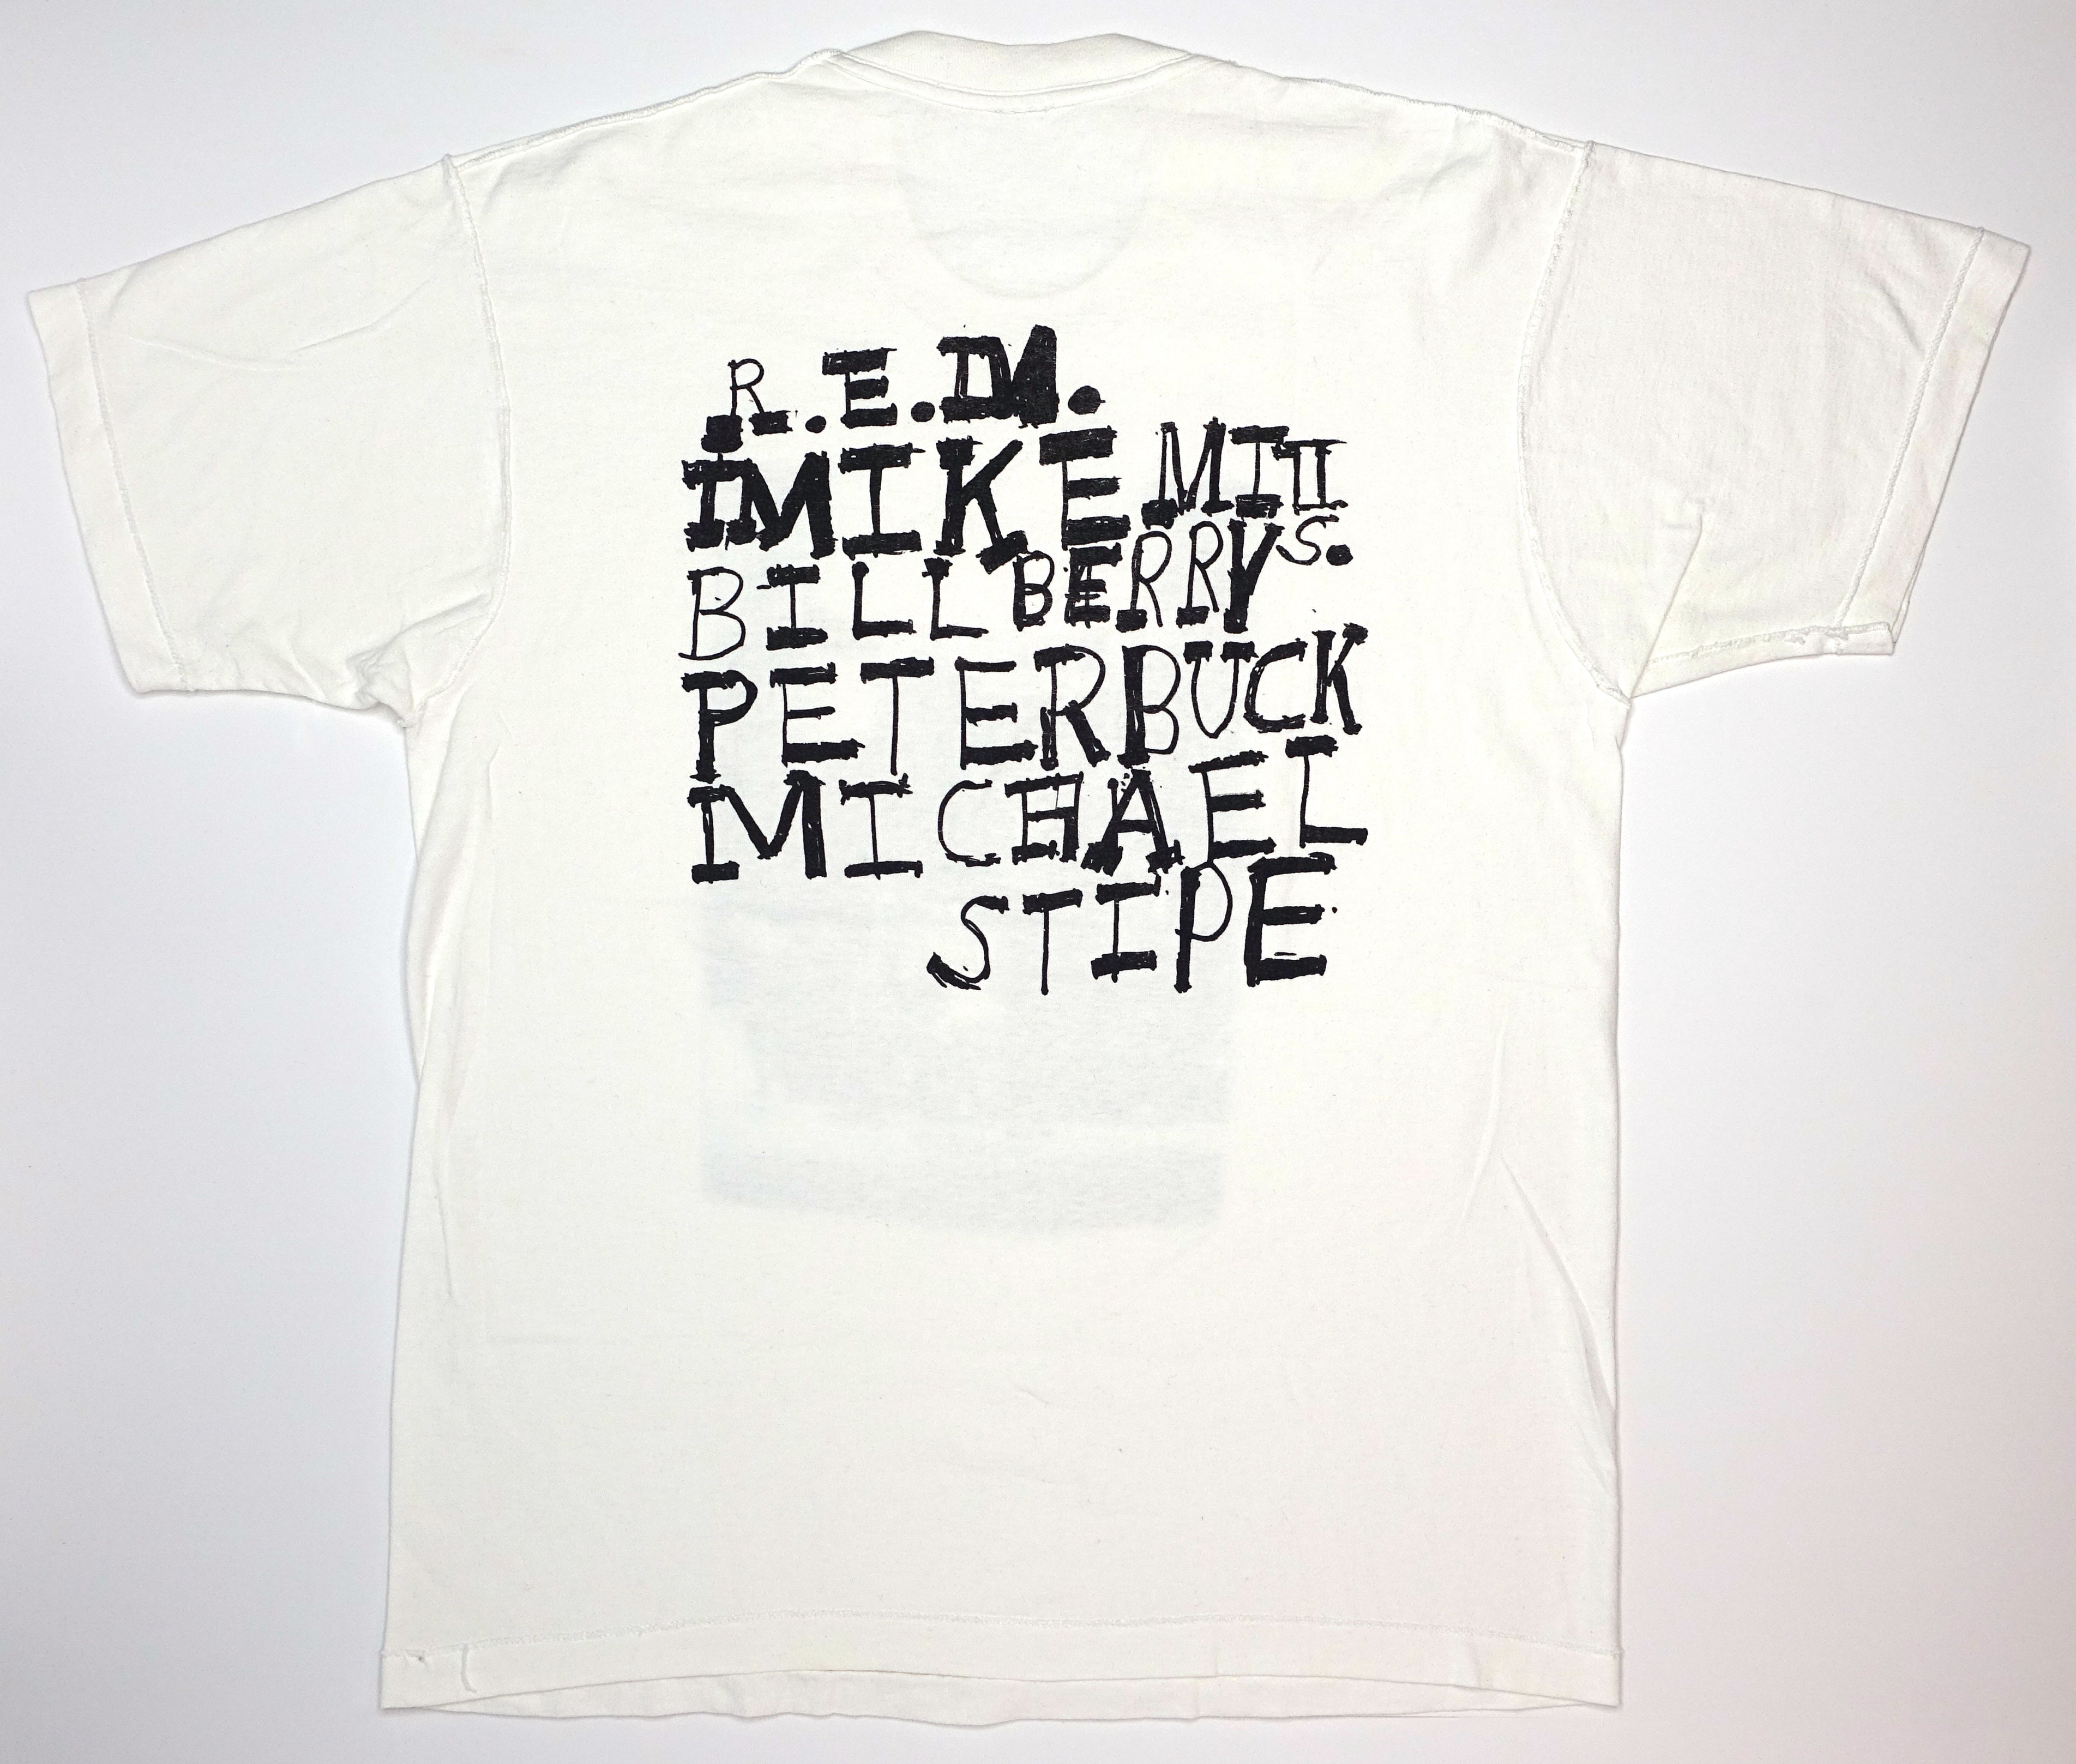 R.E.M. ‎– "Inside Out" Out Of Time 1991 Tour Shirt Size XL